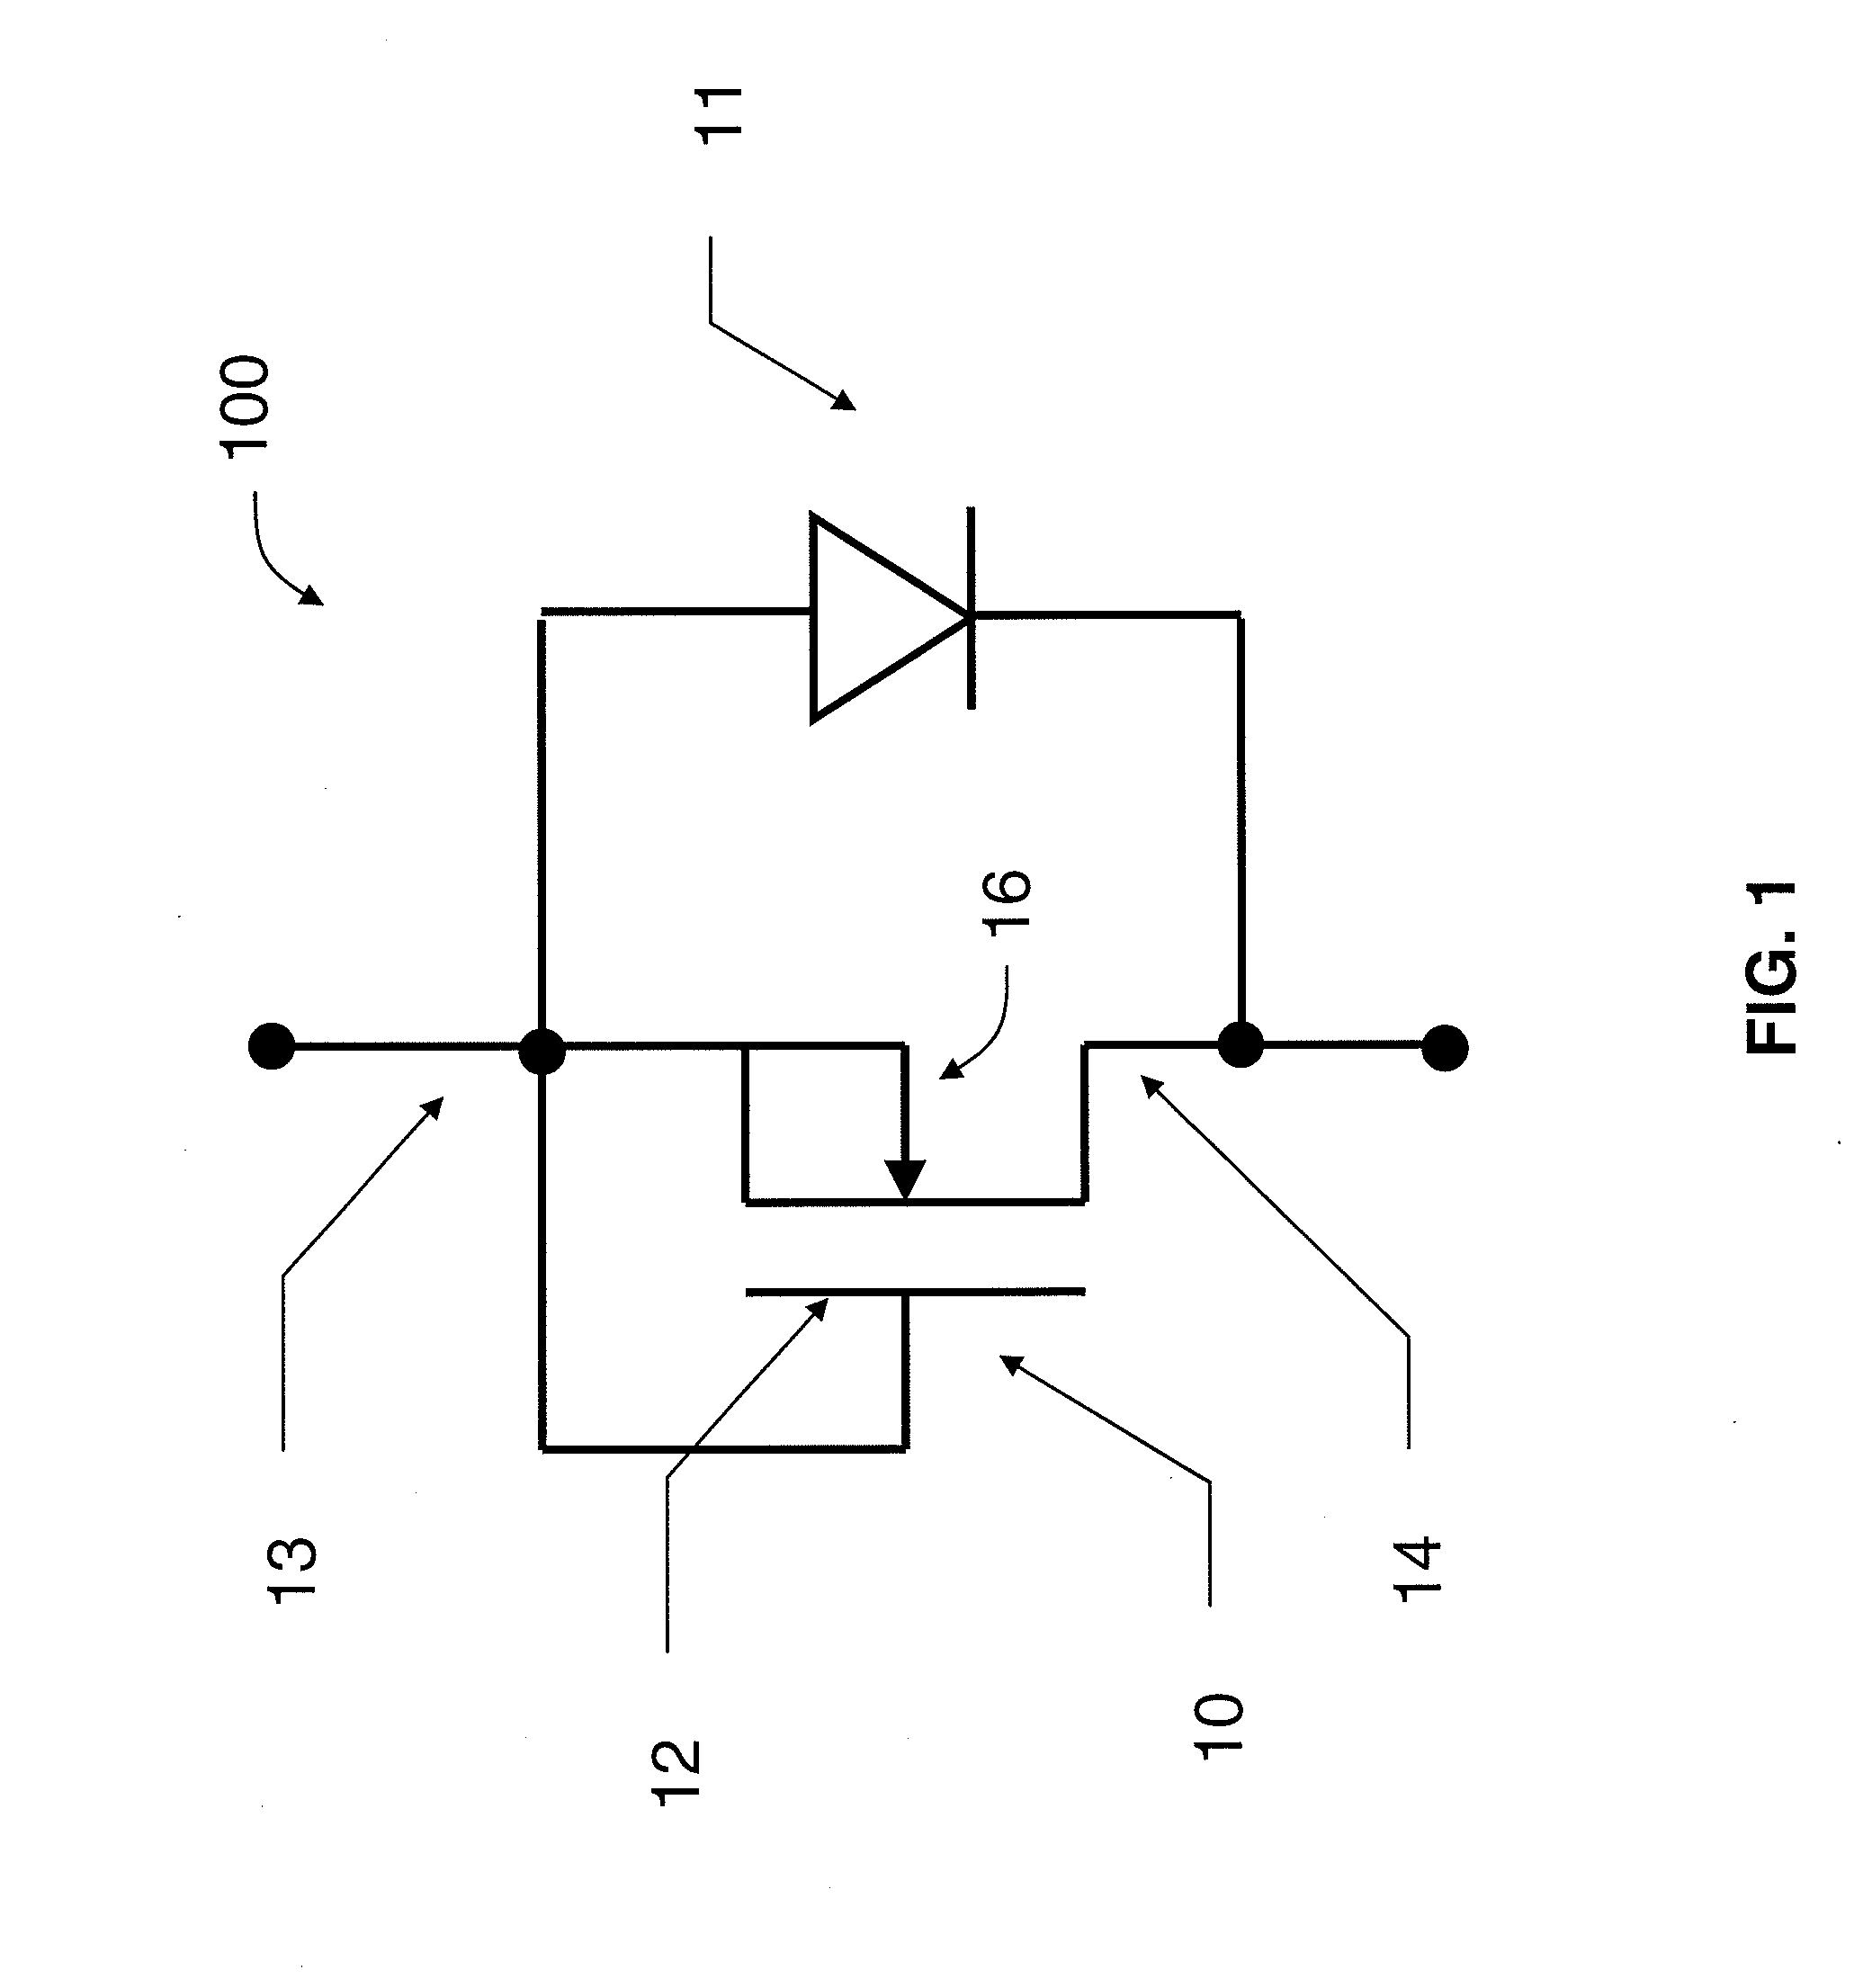 Power trench mosfet rectifier